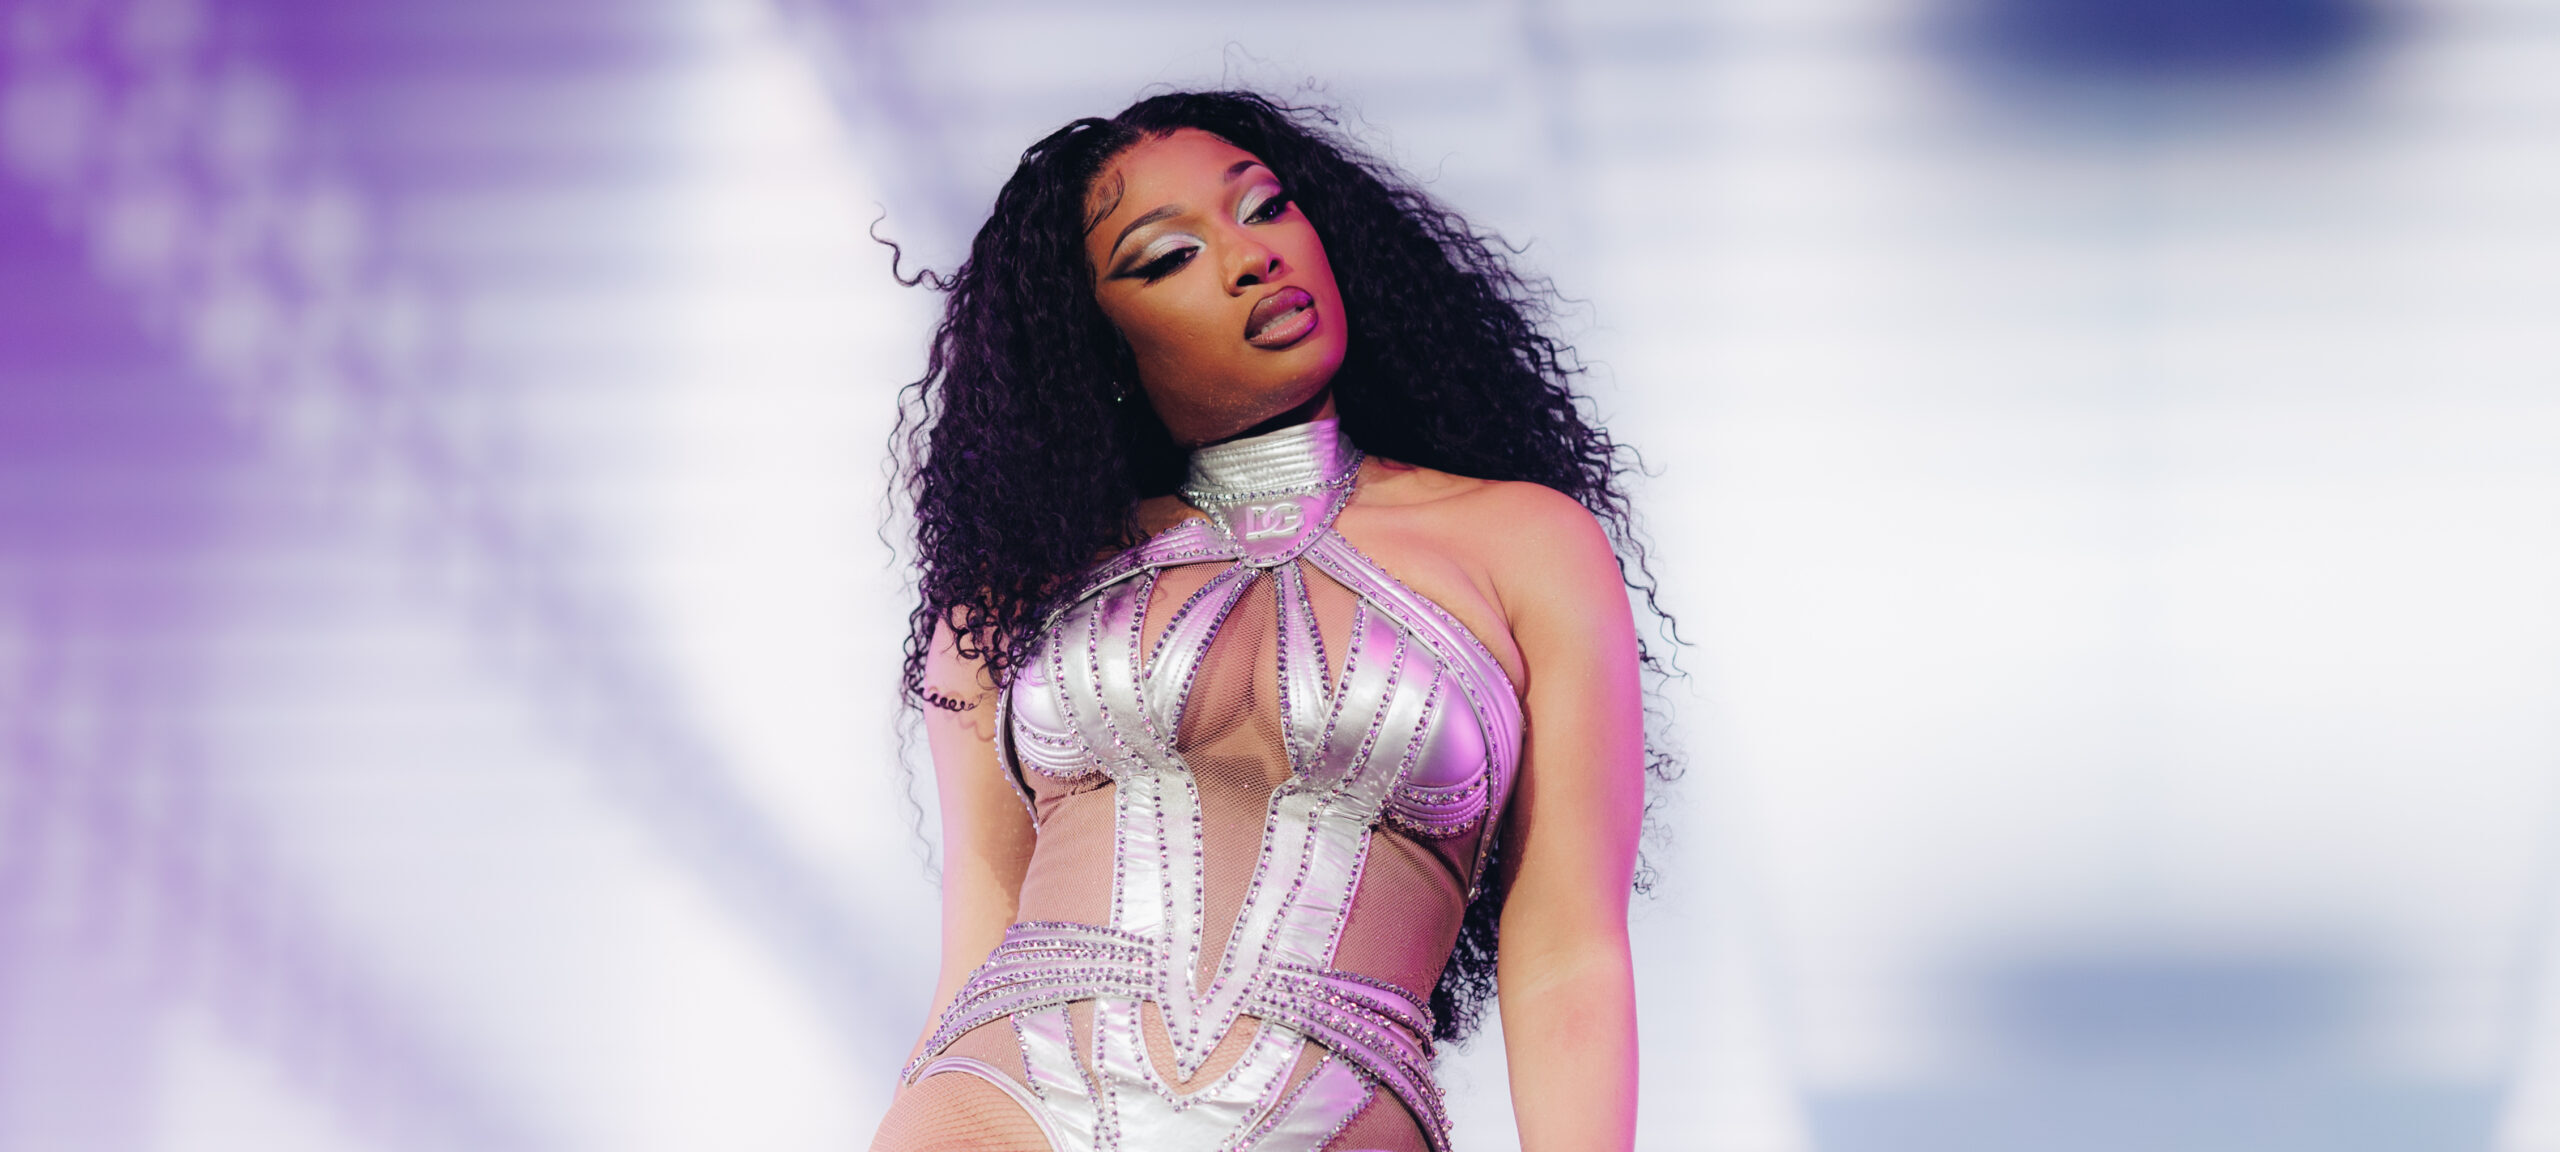 5 Times Megan Thee Stallion Made Us Proud